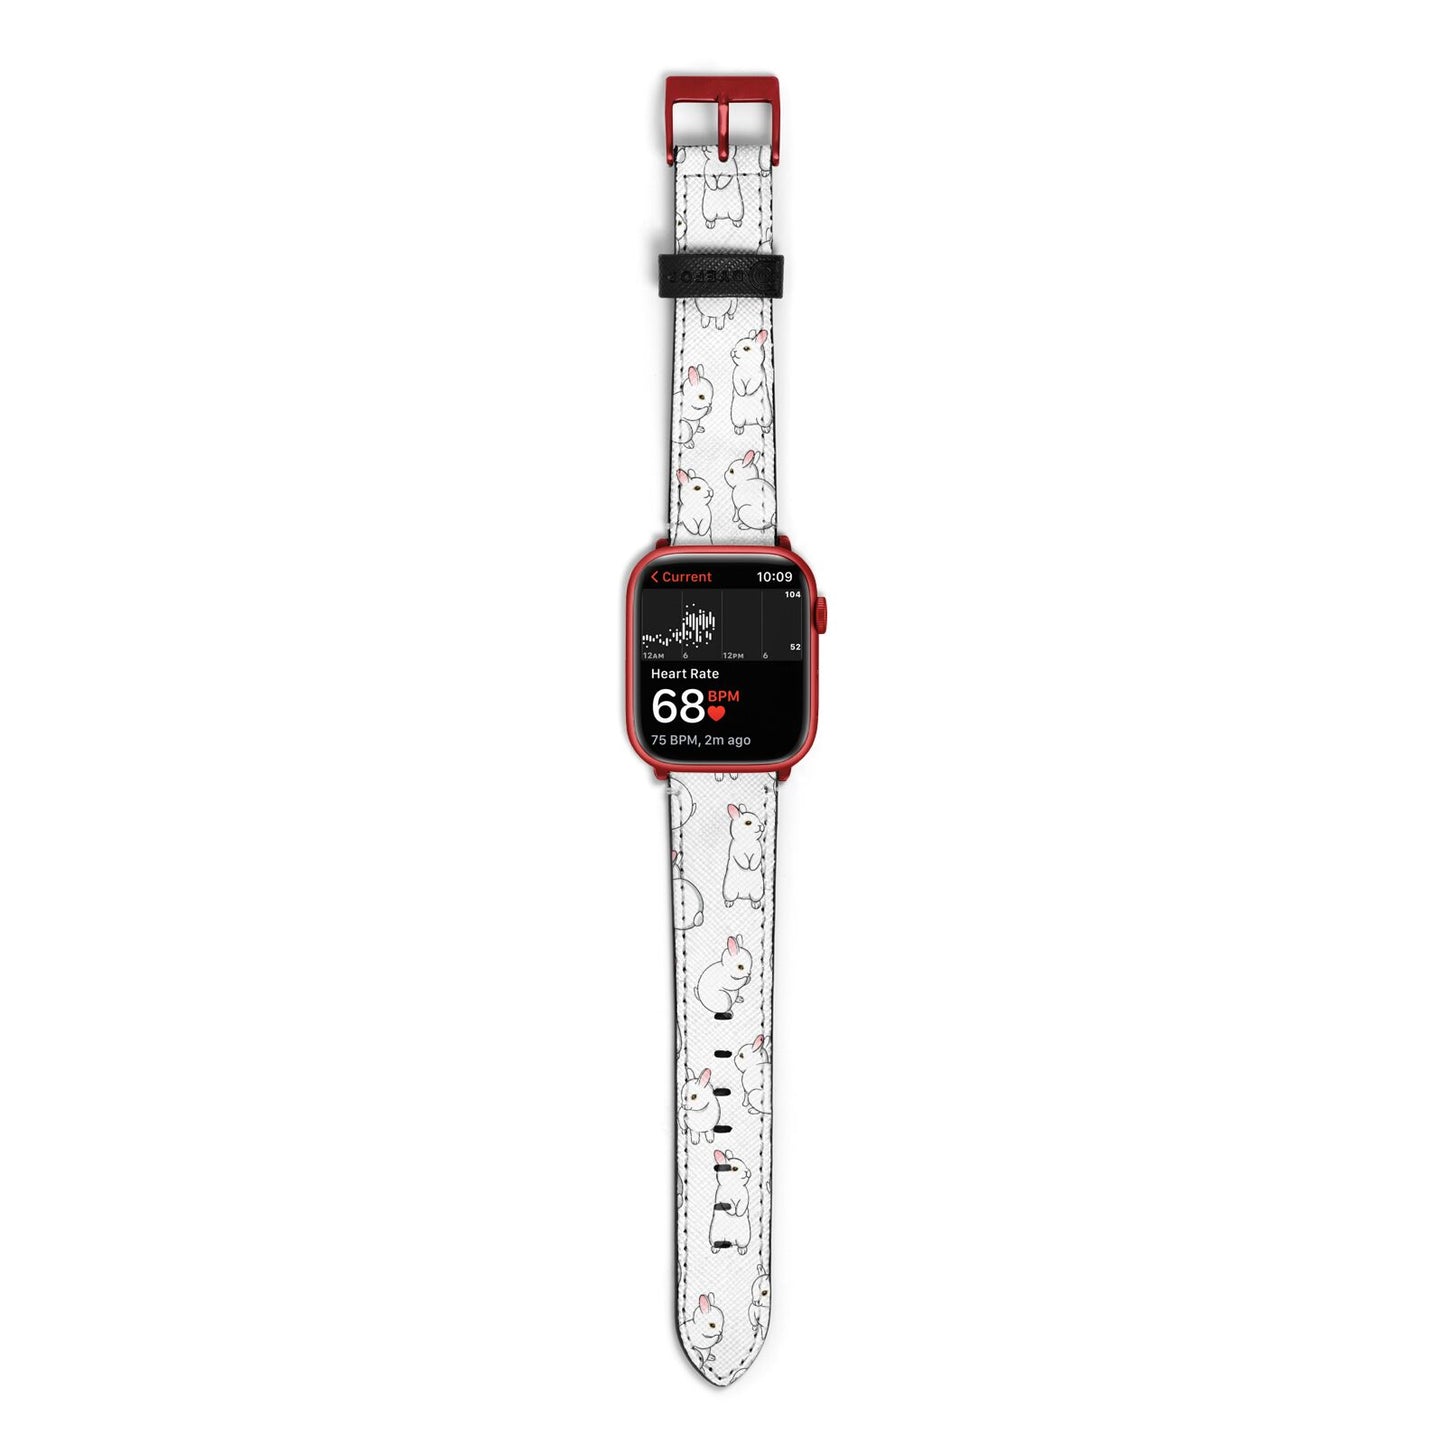 Bunny Rabbit Apple Watch Strap Size 38mm with Red Hardware